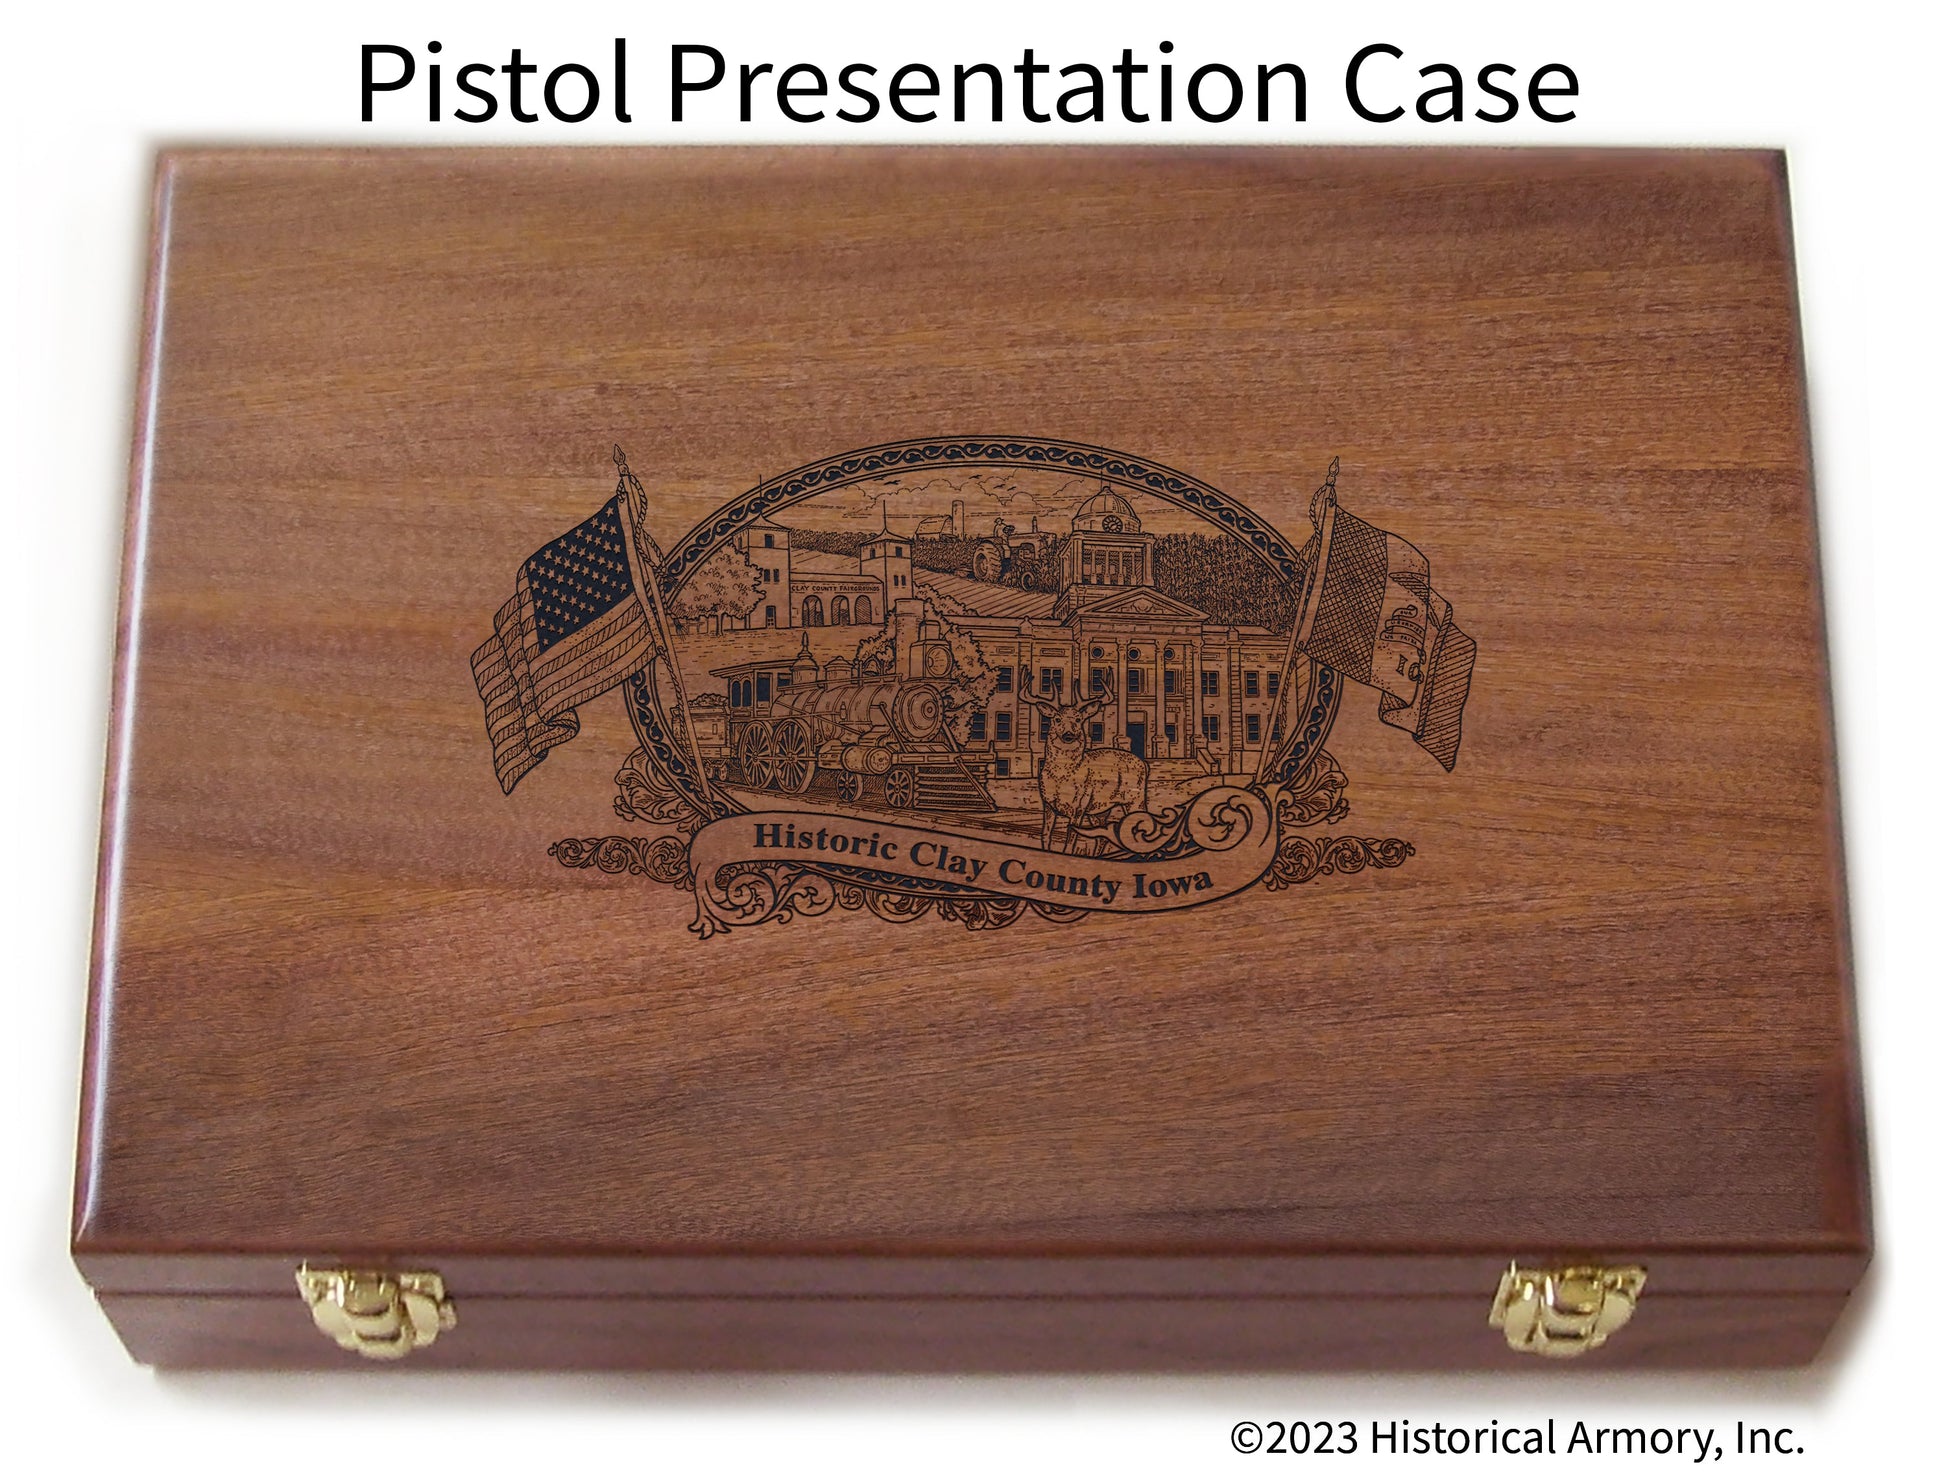 Clay County Iowa Engraved .45 Auto Ruger 1911 Presentation Case